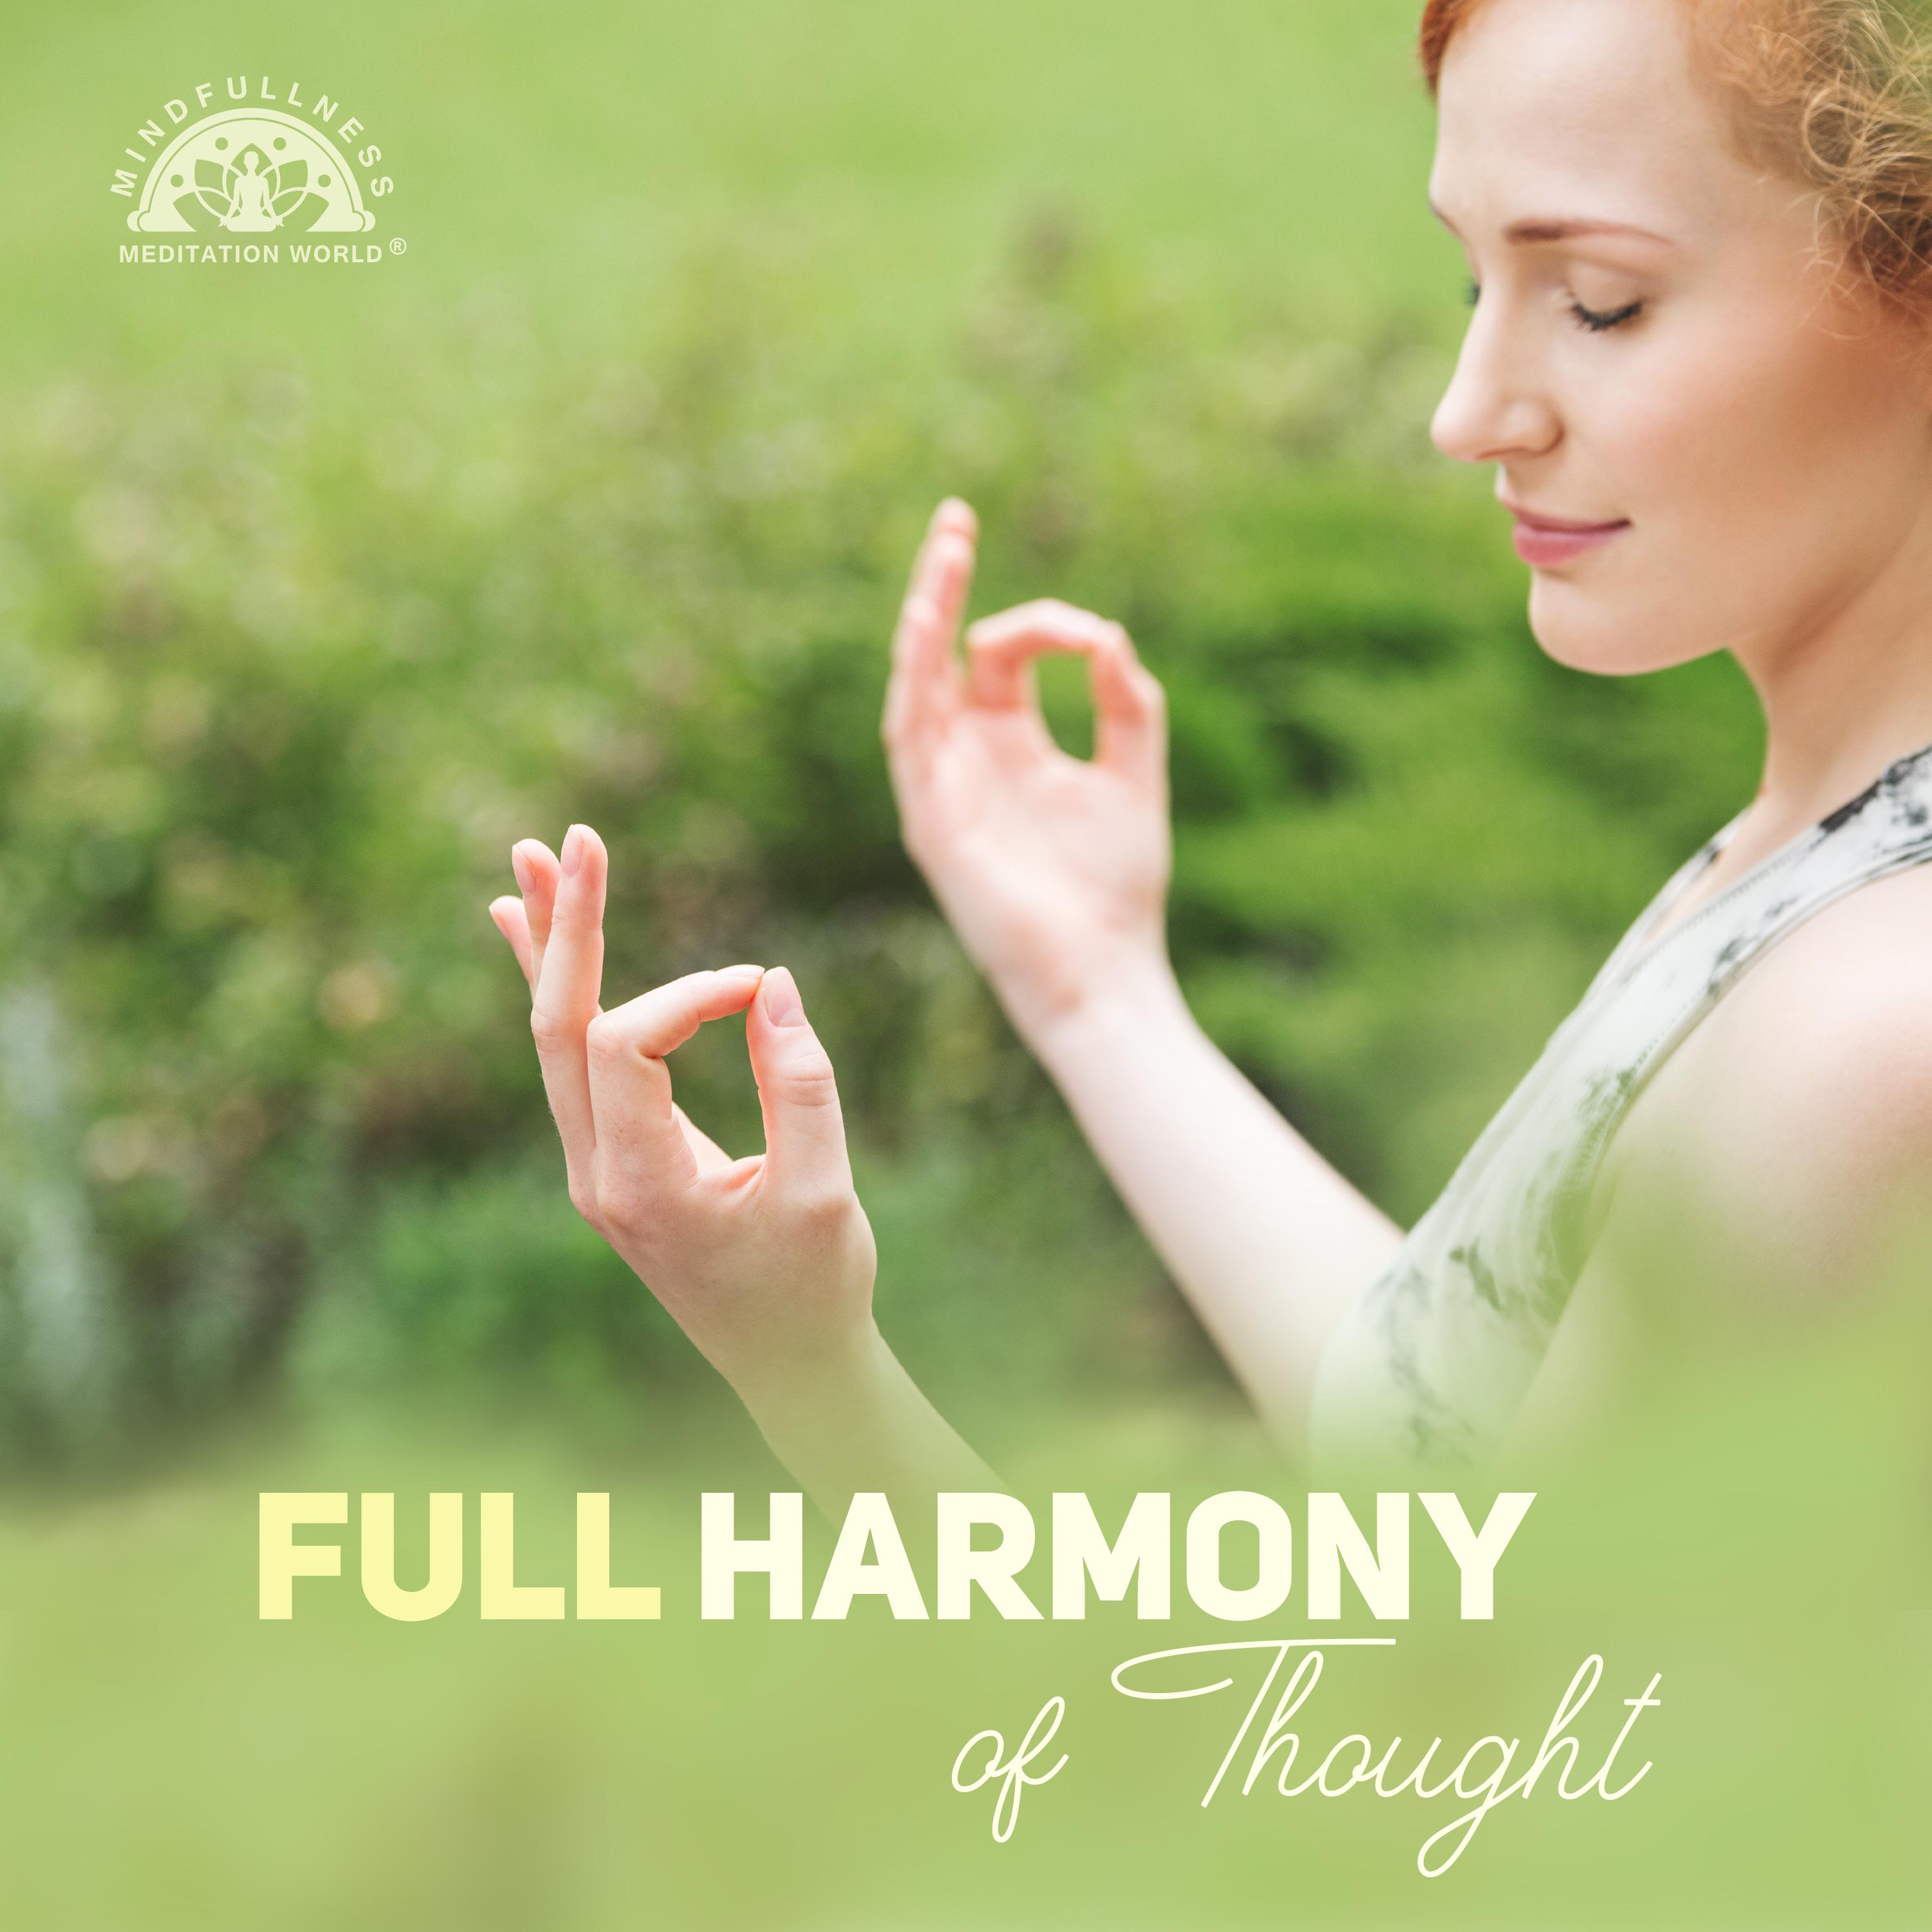 Full Harmony of Thought(Mindfulness Meditation with Ambient Sounds)